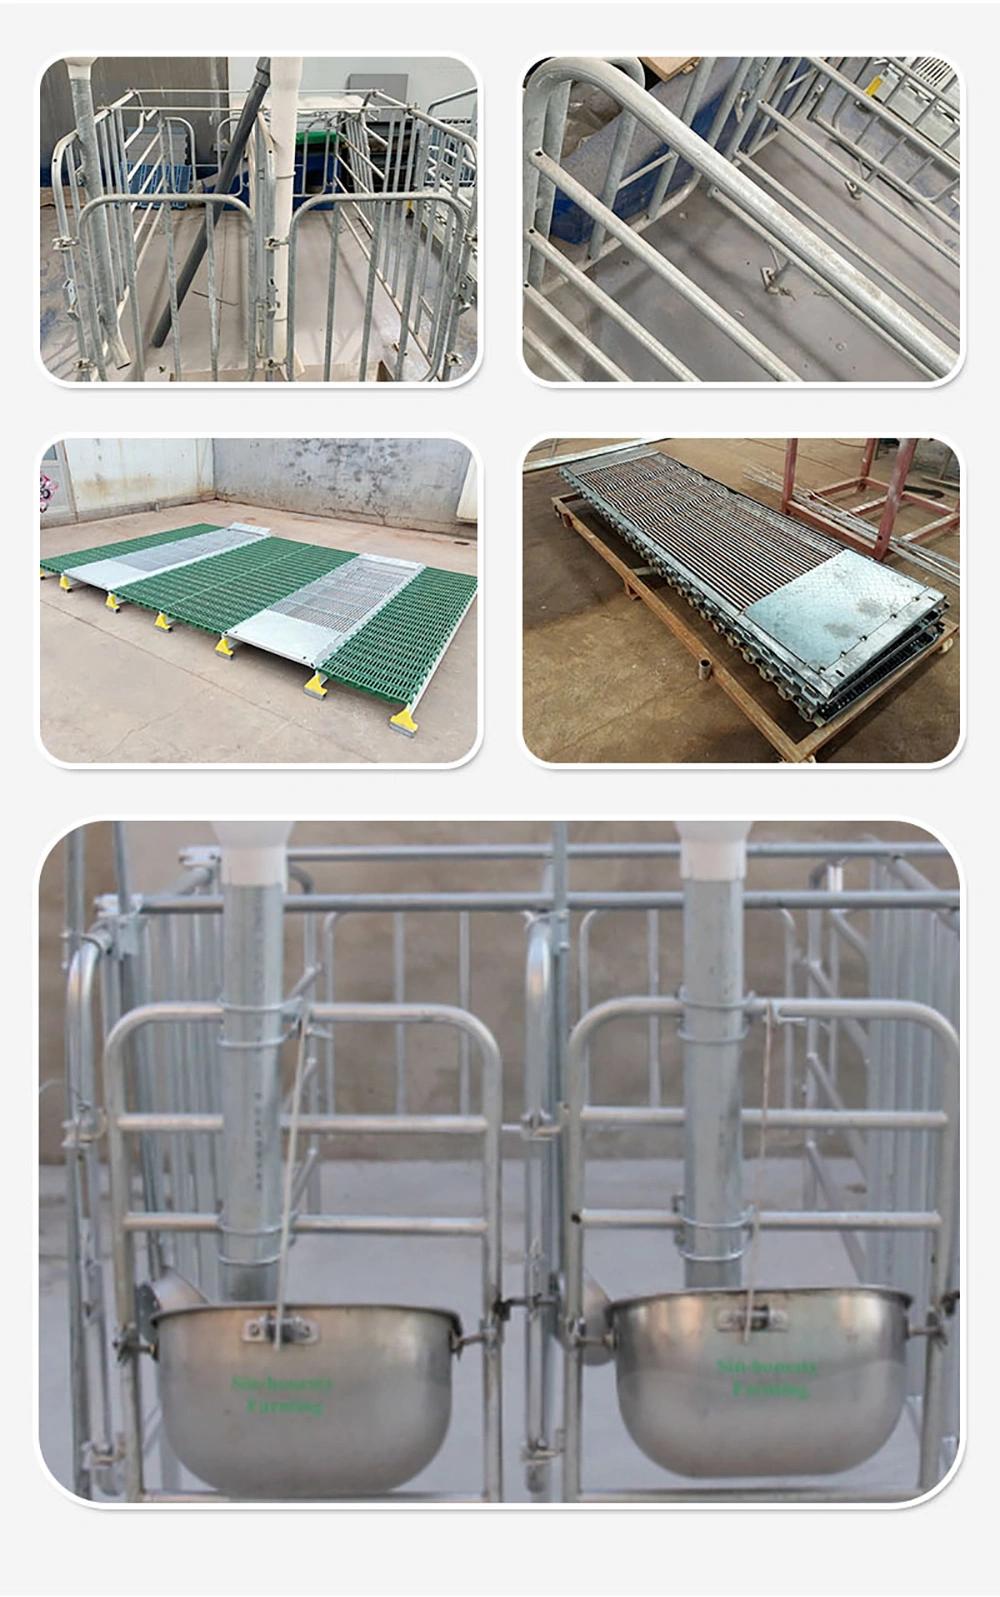 Sow Gestation Bed Galvanized Pig Farrowing Crates Pen Pig Flooring Stall Farrowing Beds